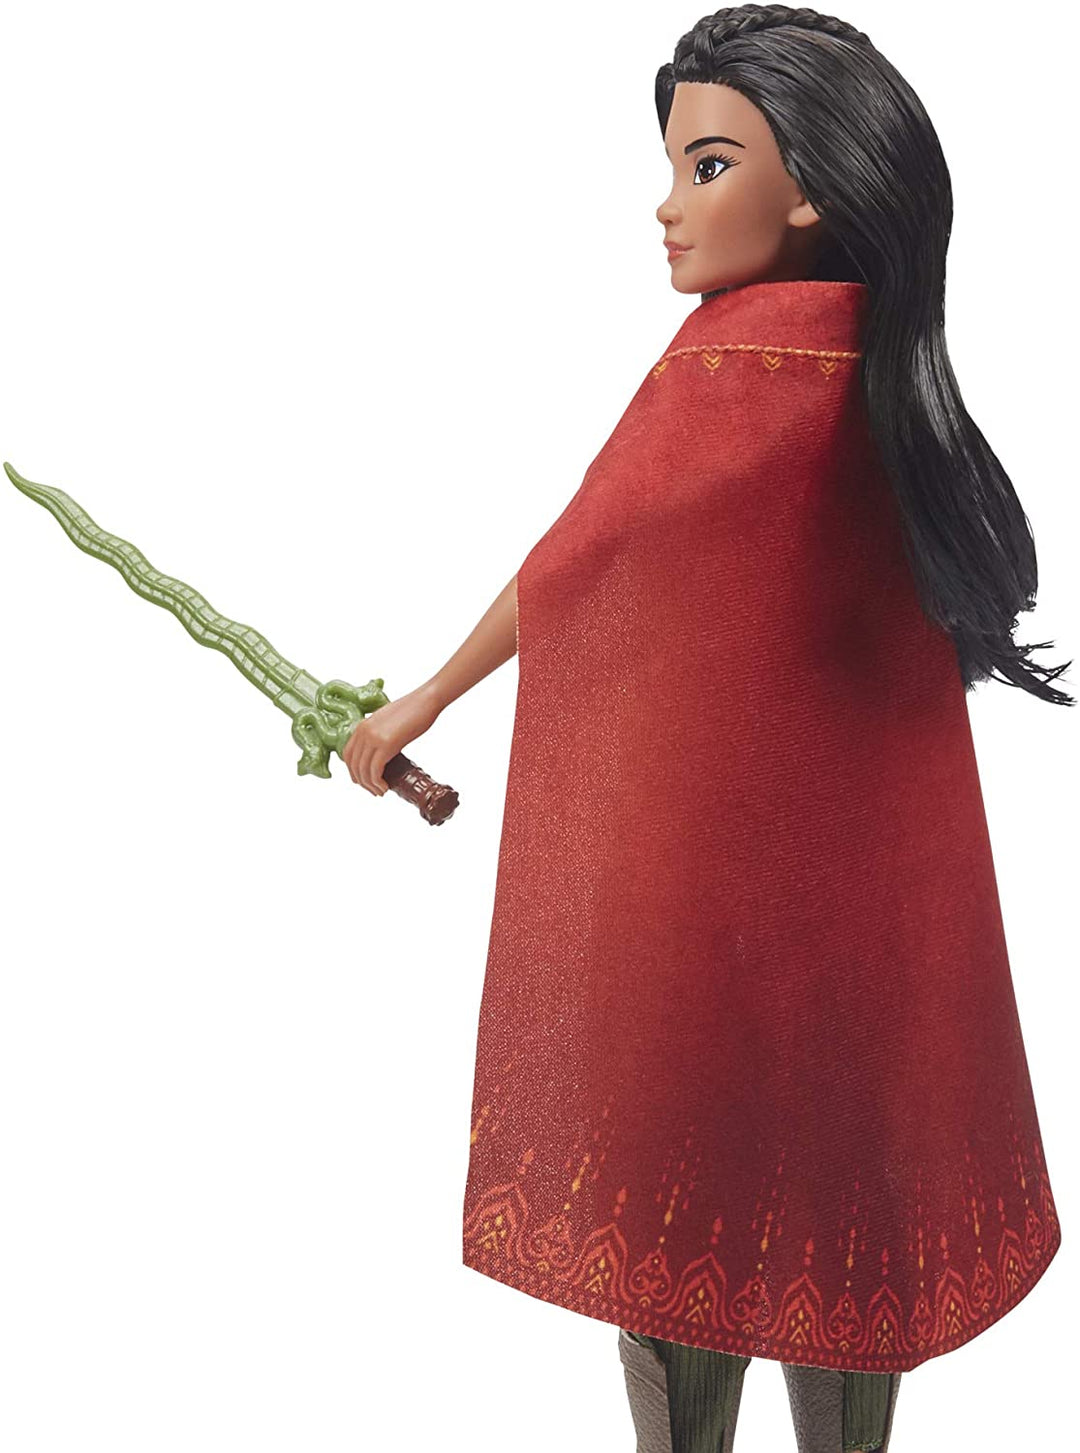 Disney Raya Fashion Doll with Clothes, Shoes, and Sword